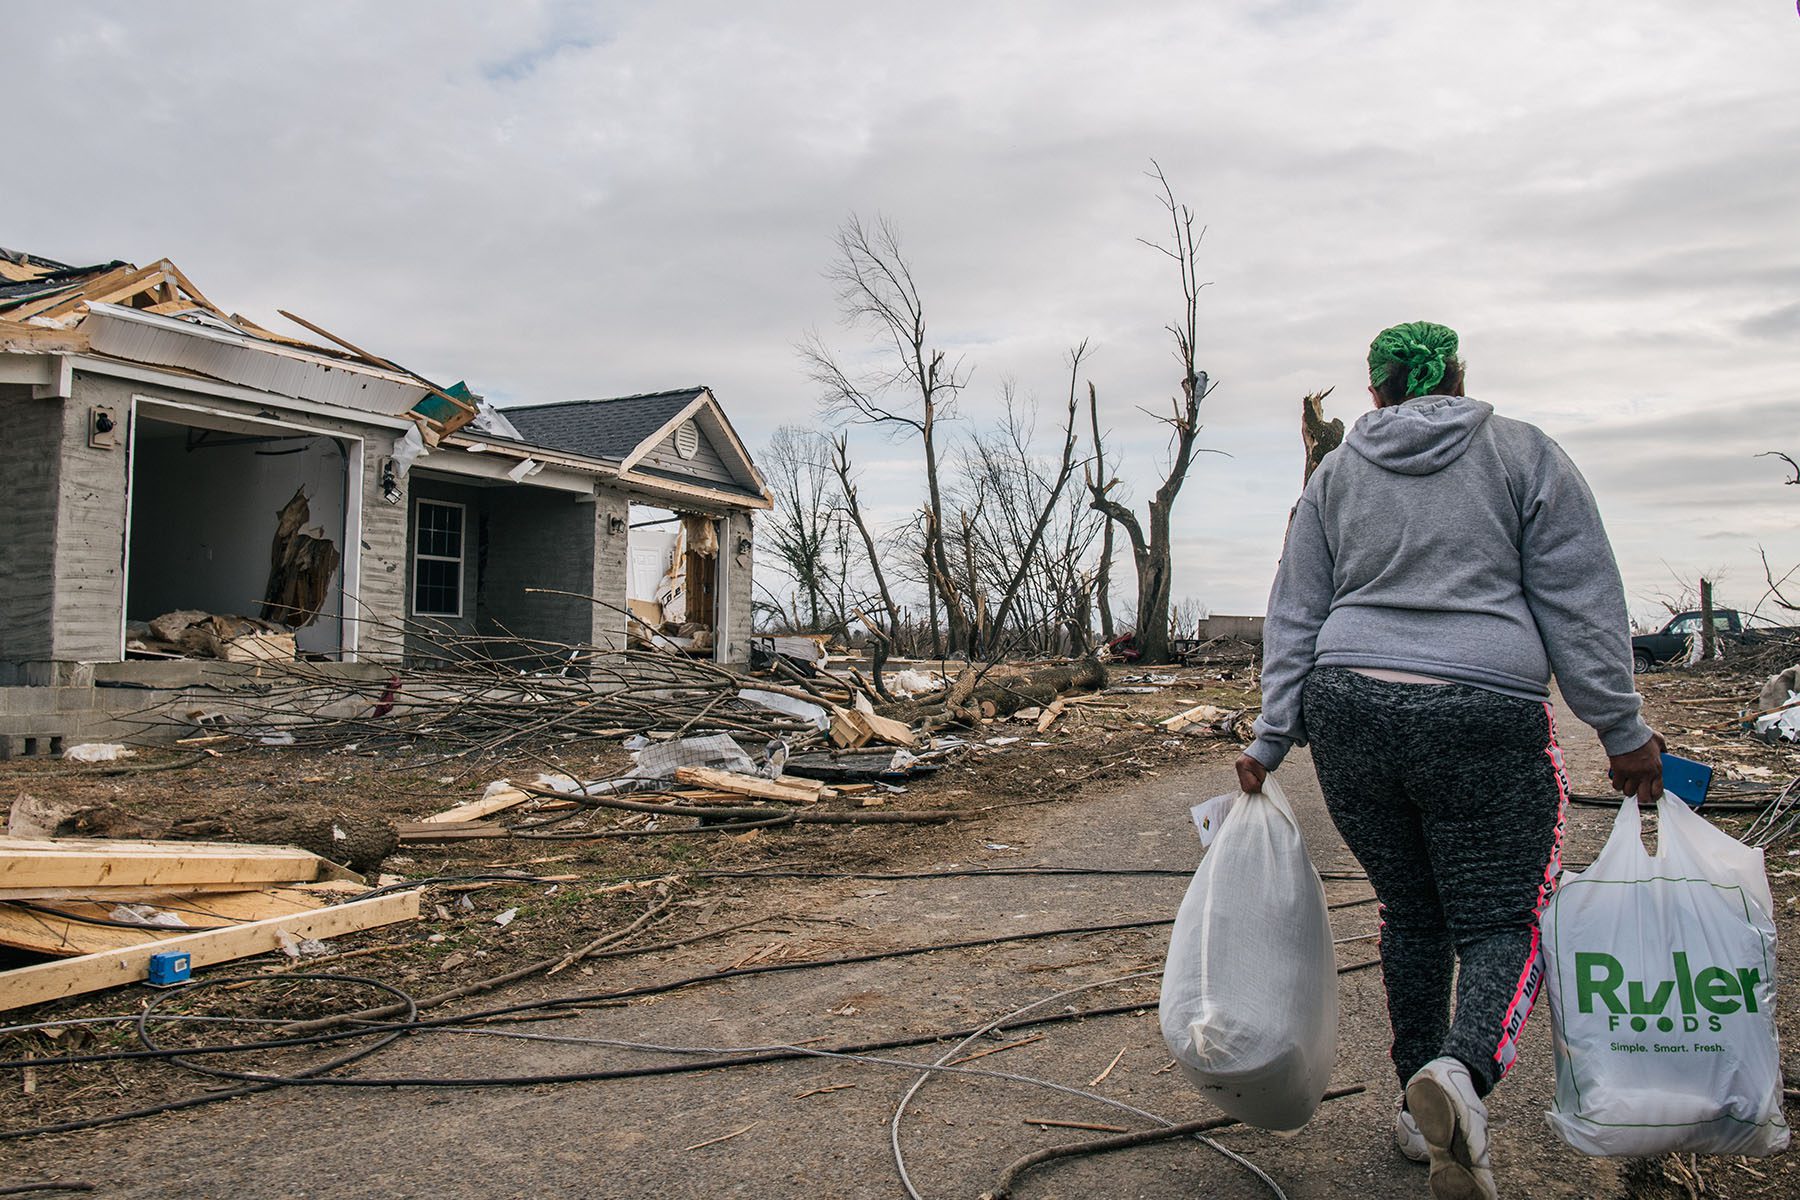 A woman carries shopping bags as she walks by homes destroyed by a tornato.